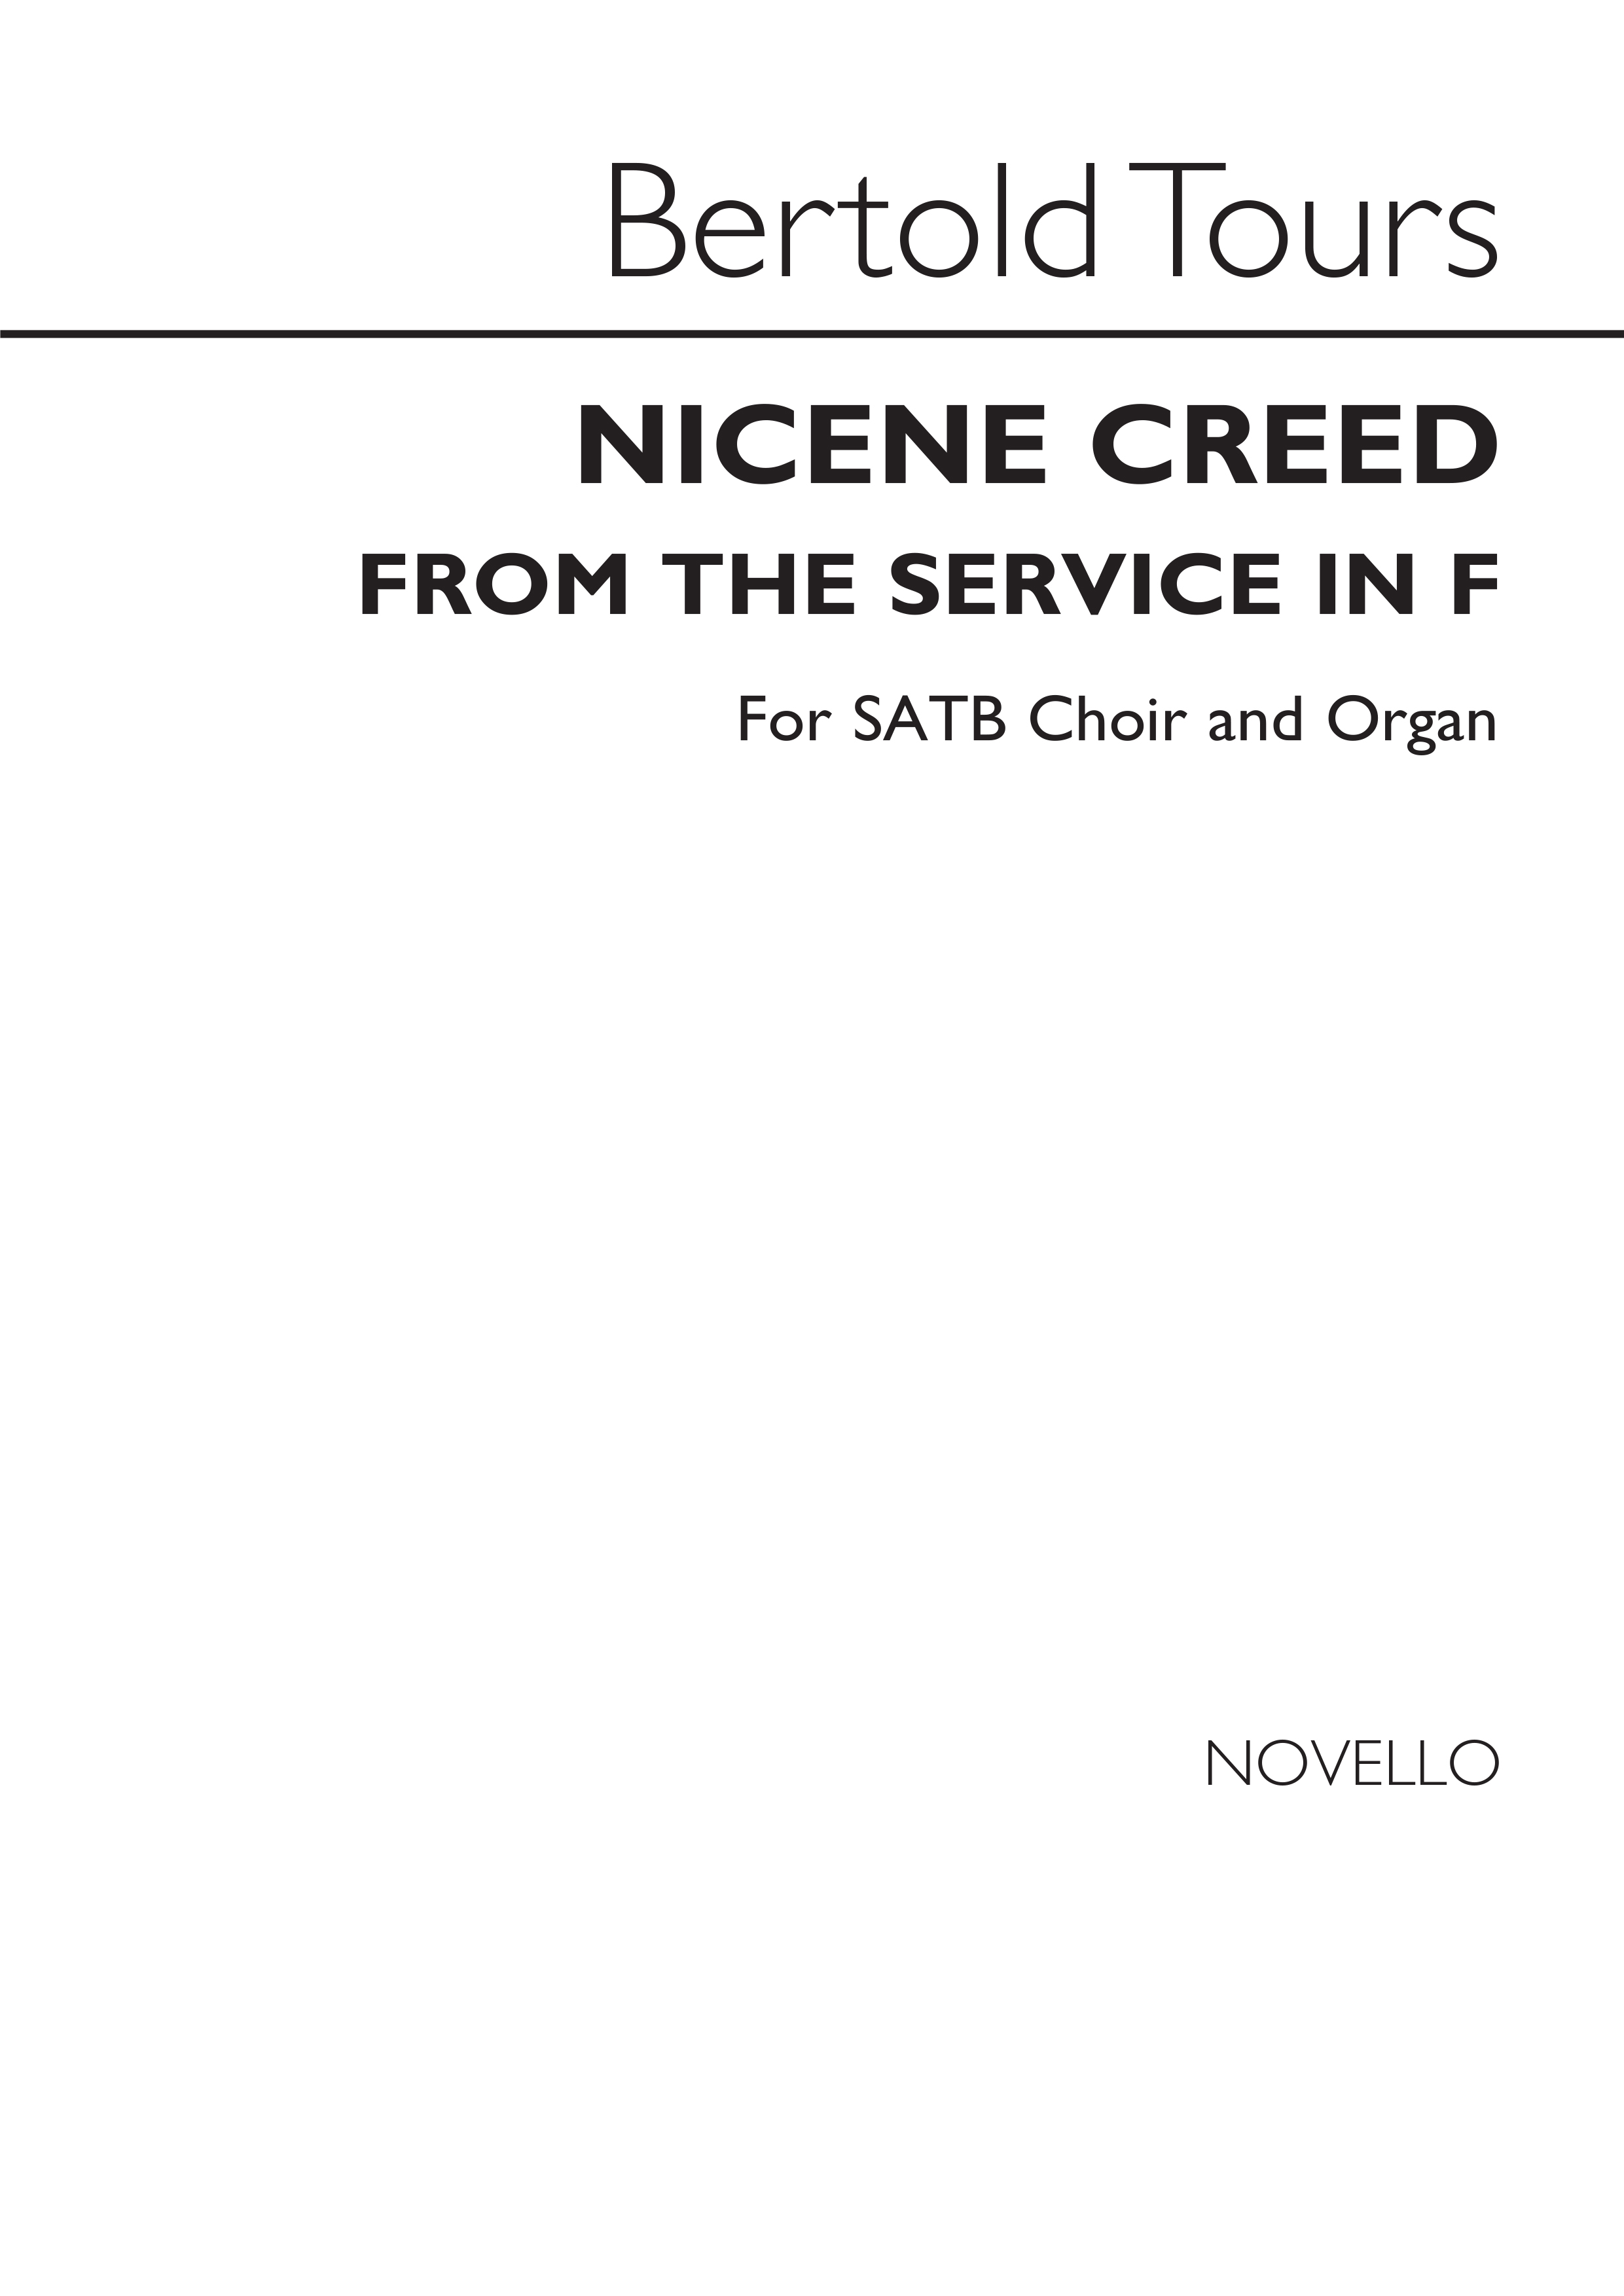 Berthold Tours: The Nicene Creed In F (From Tours Service In F): SATB: Vocal